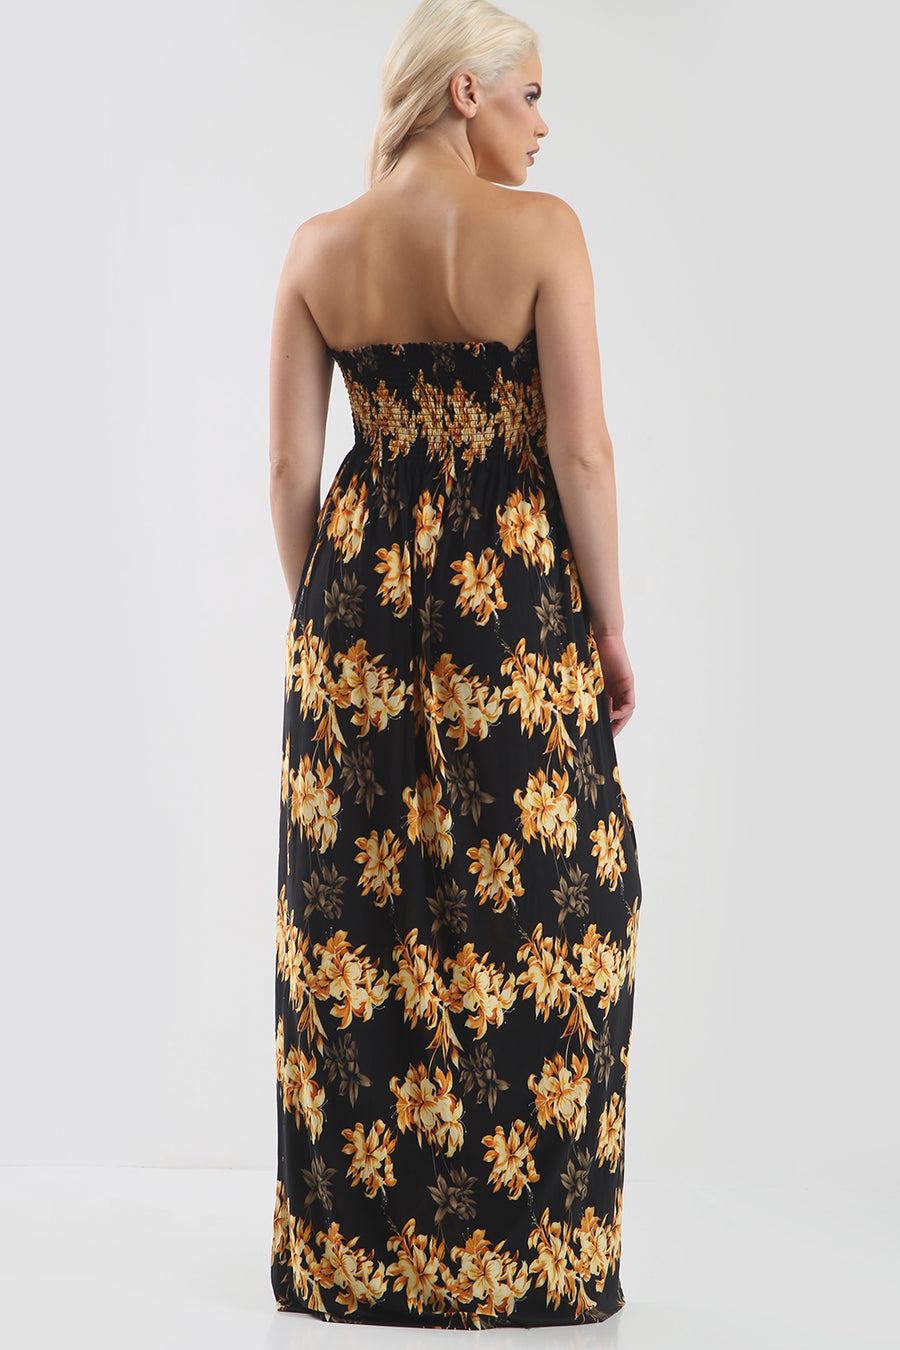 Strapless Maxi Dress in Gold Tropical Print - bejealous-com